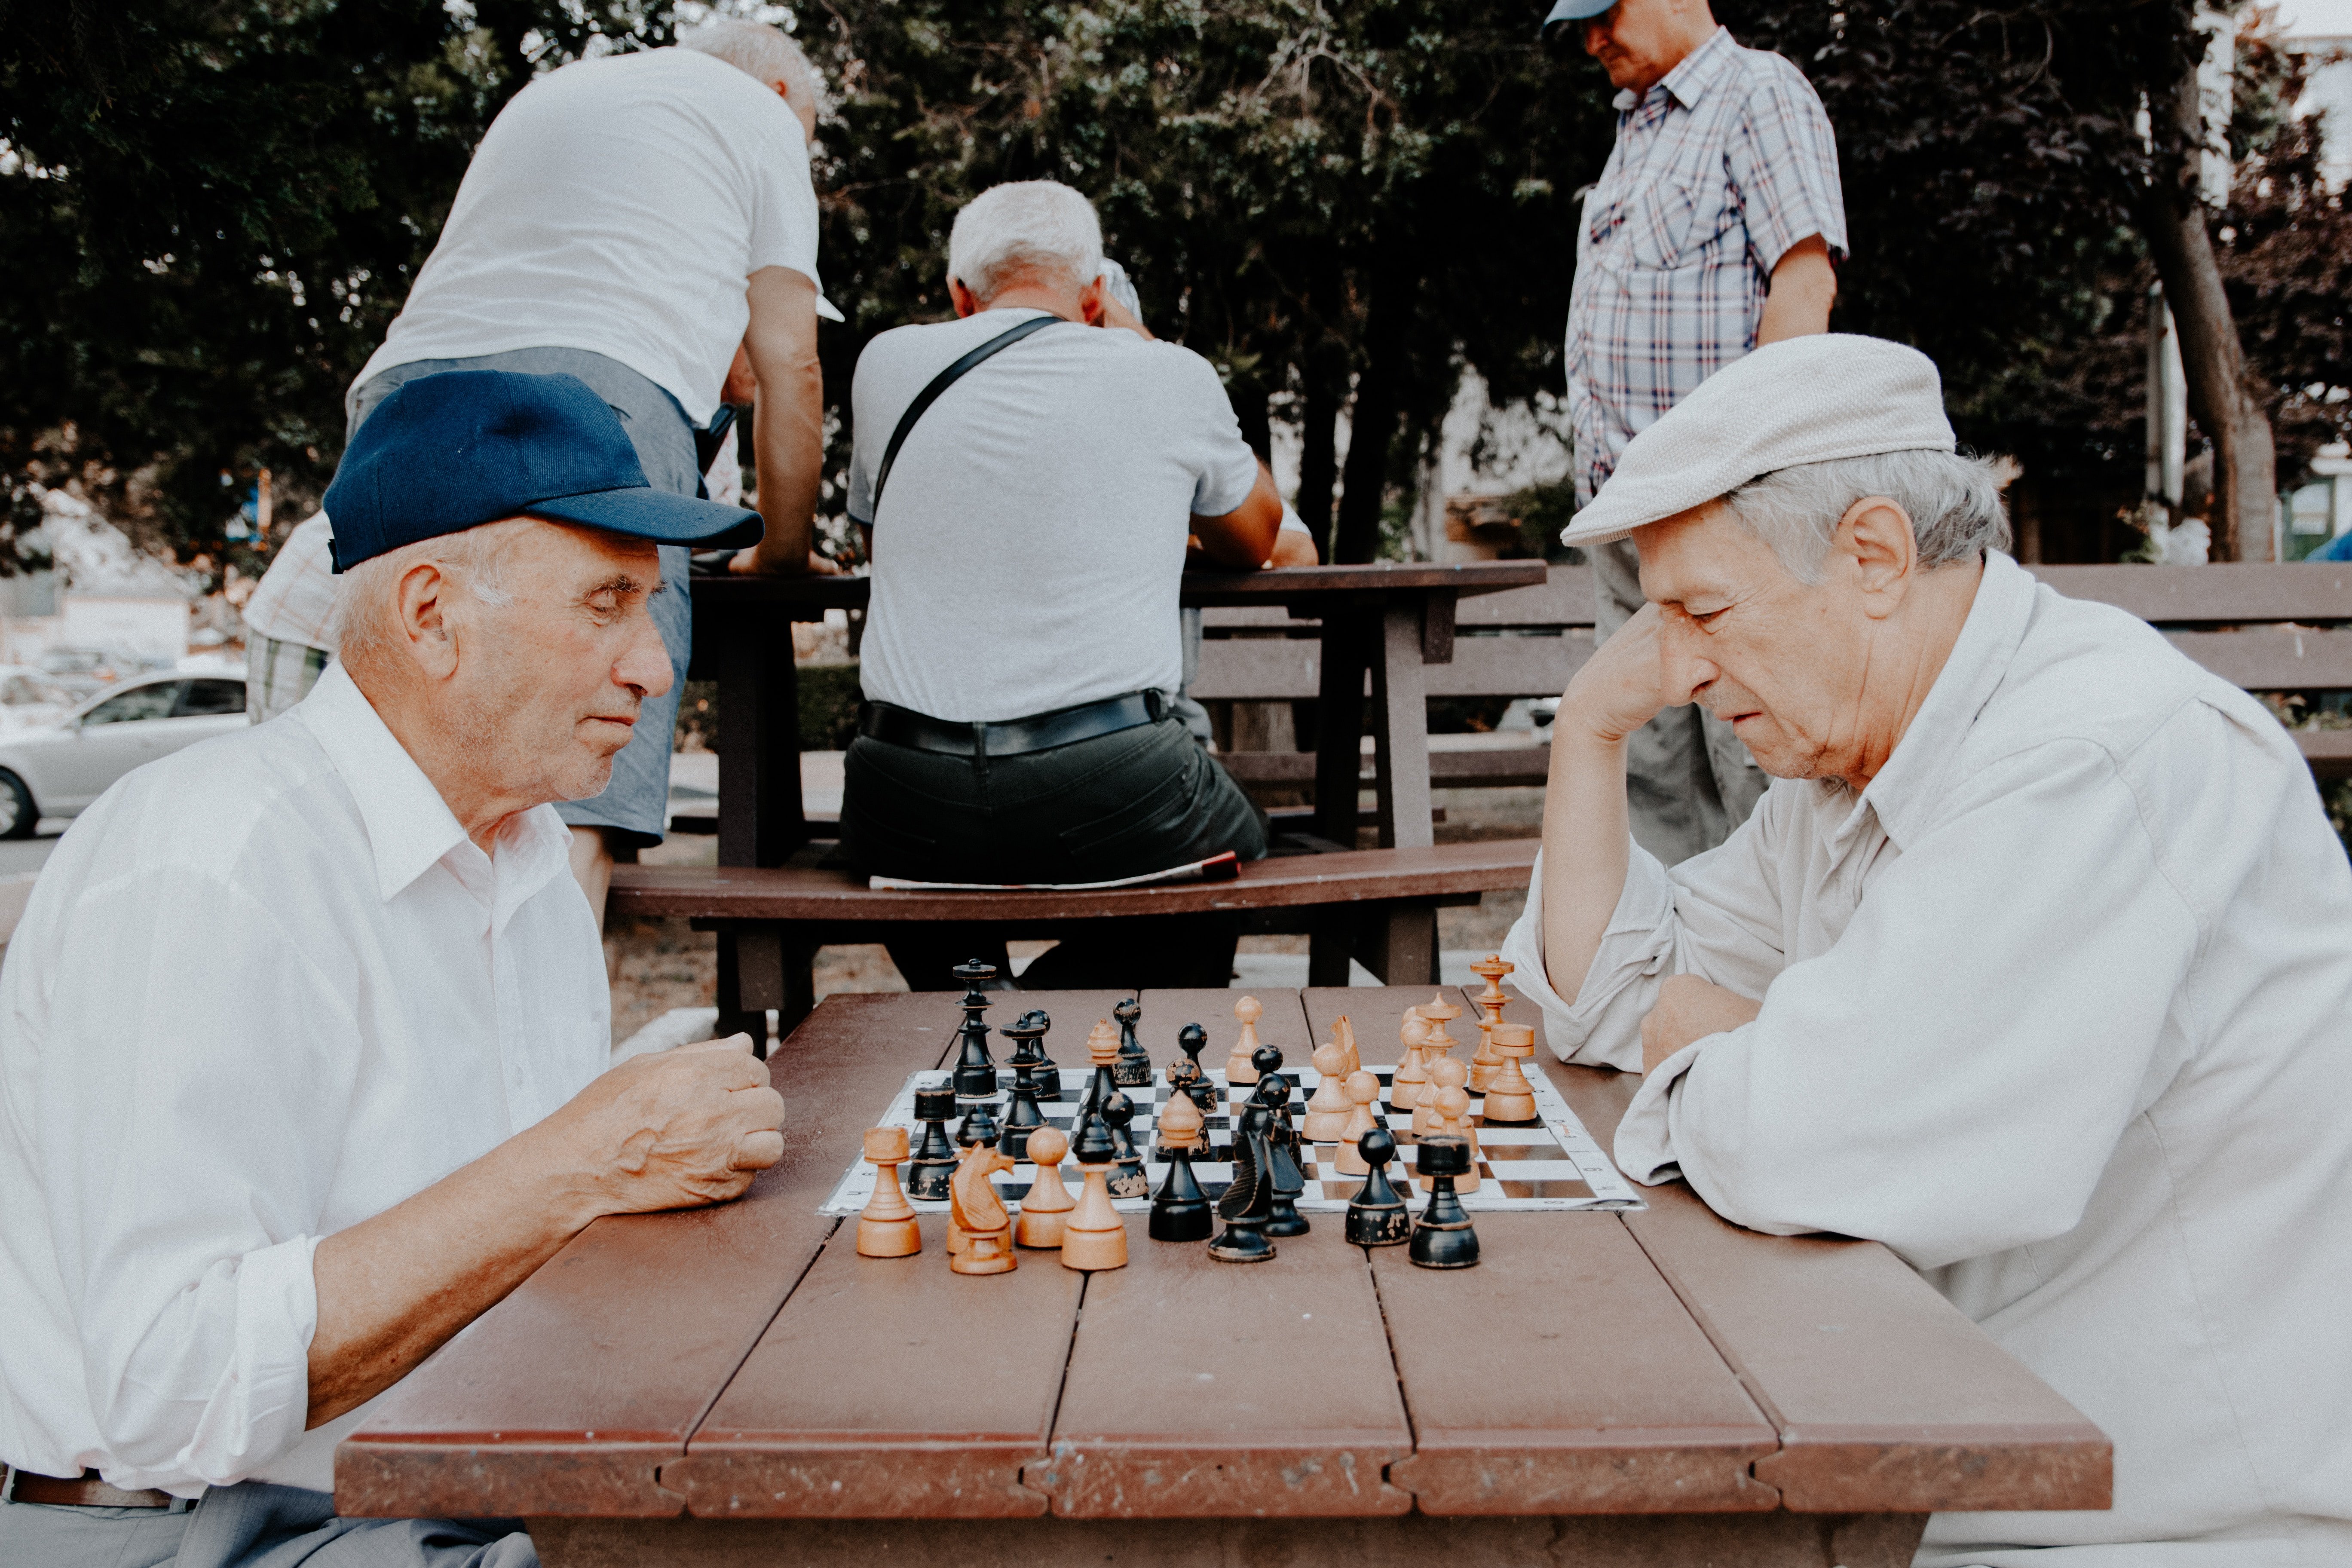 How The Power of Games and Routine Help with Alzheimer's